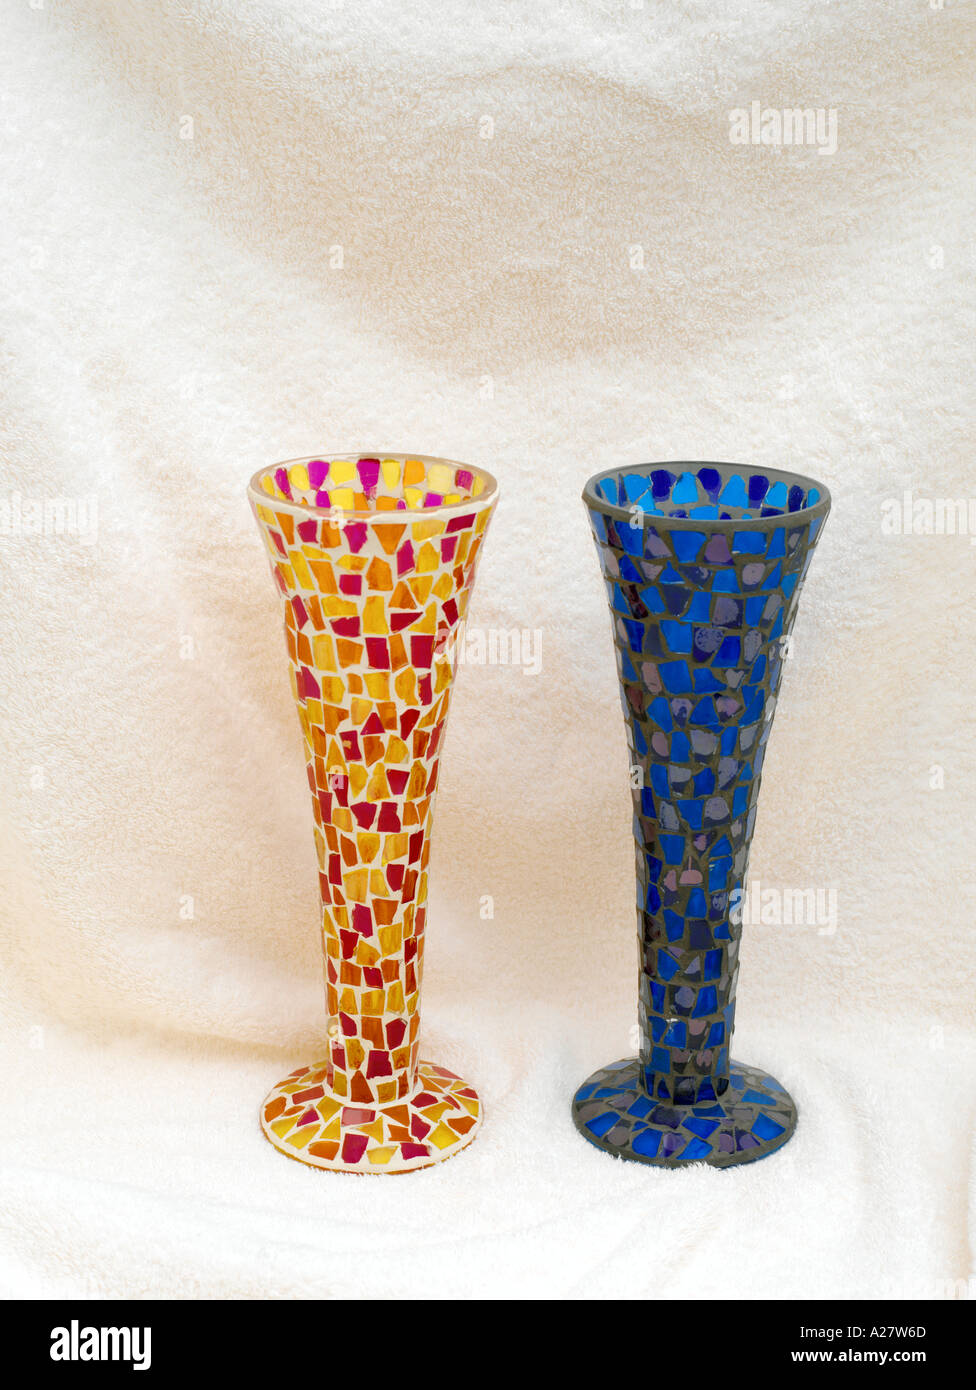 Recycled Glass Vases Mosac Stock Photo